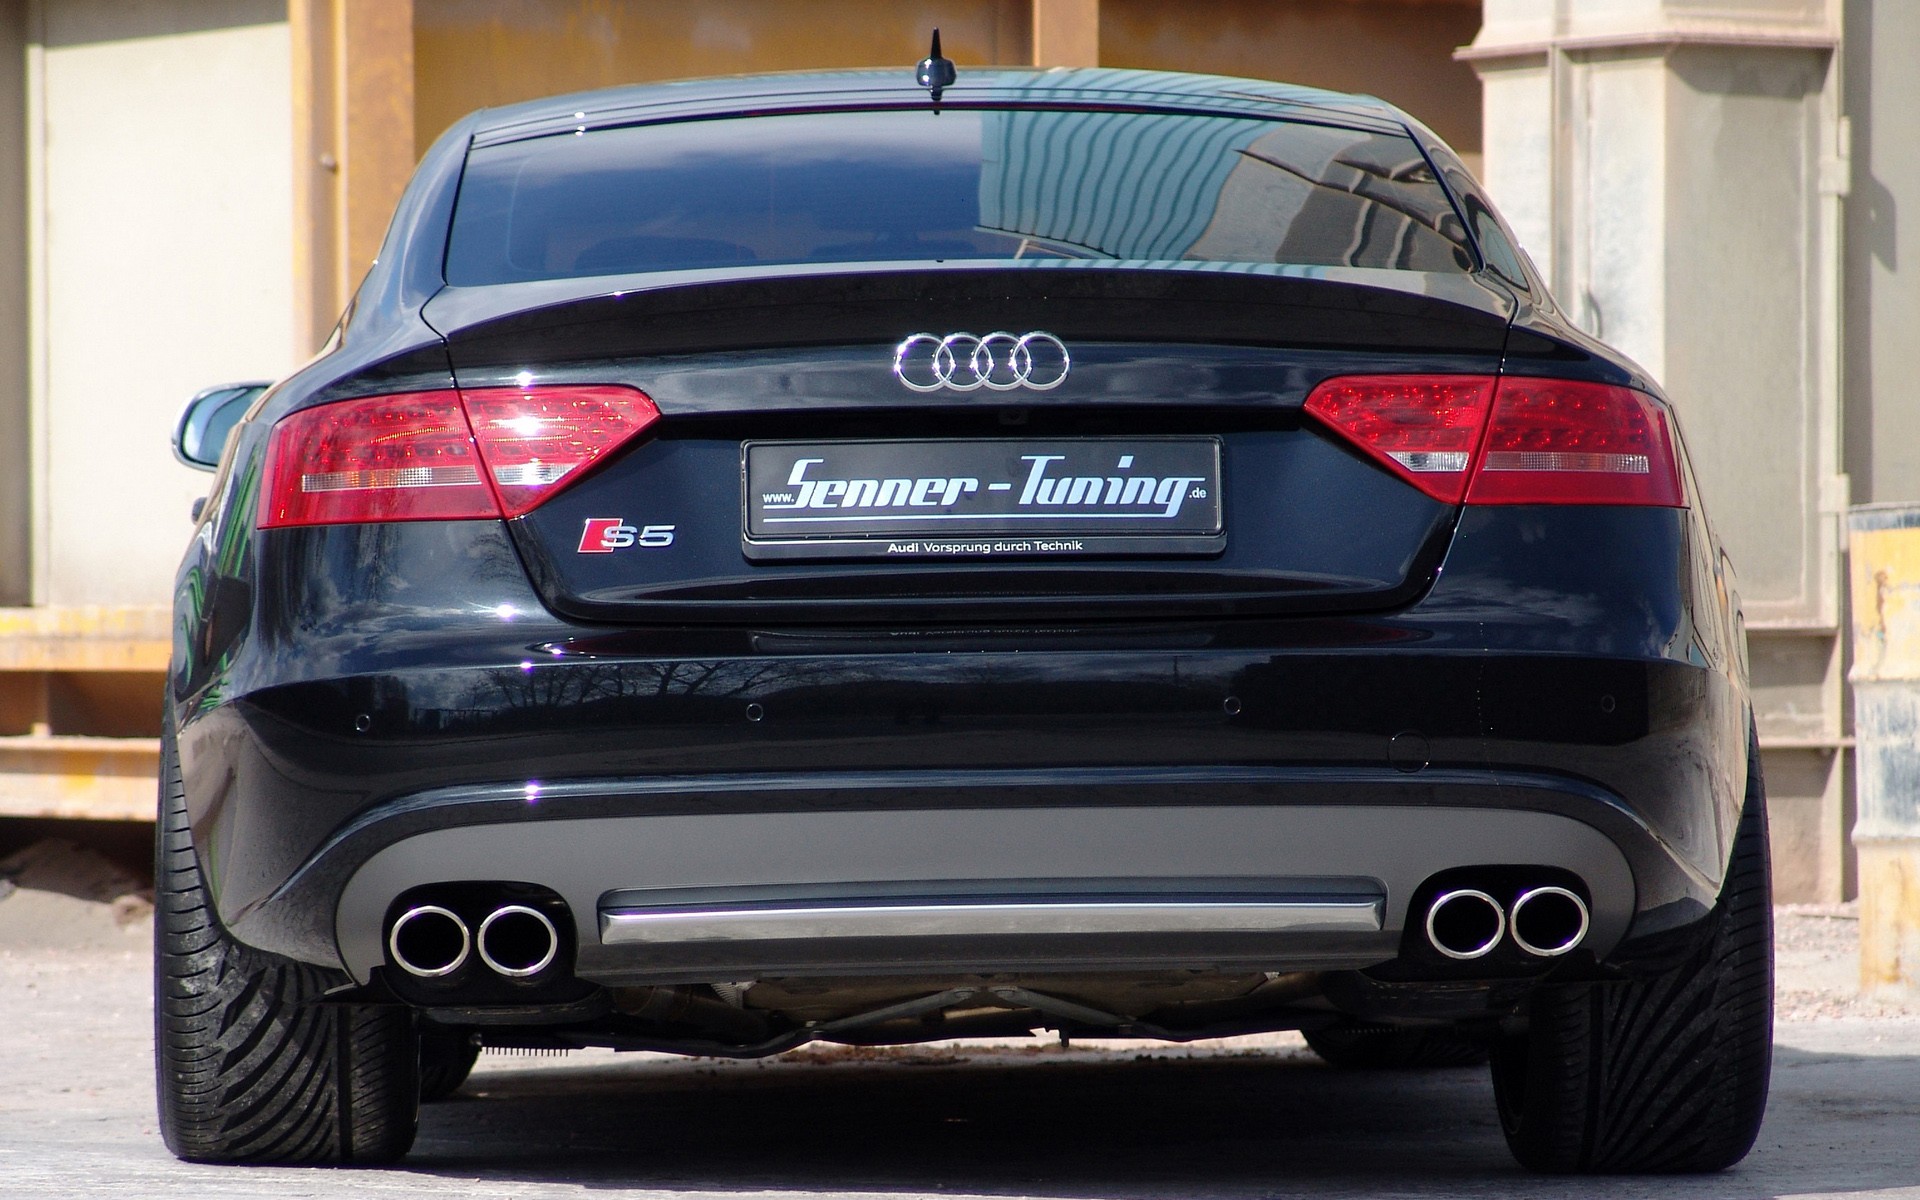 Download High quality S5 back Senner-Tuning Audi wallpaper / 1920x1200